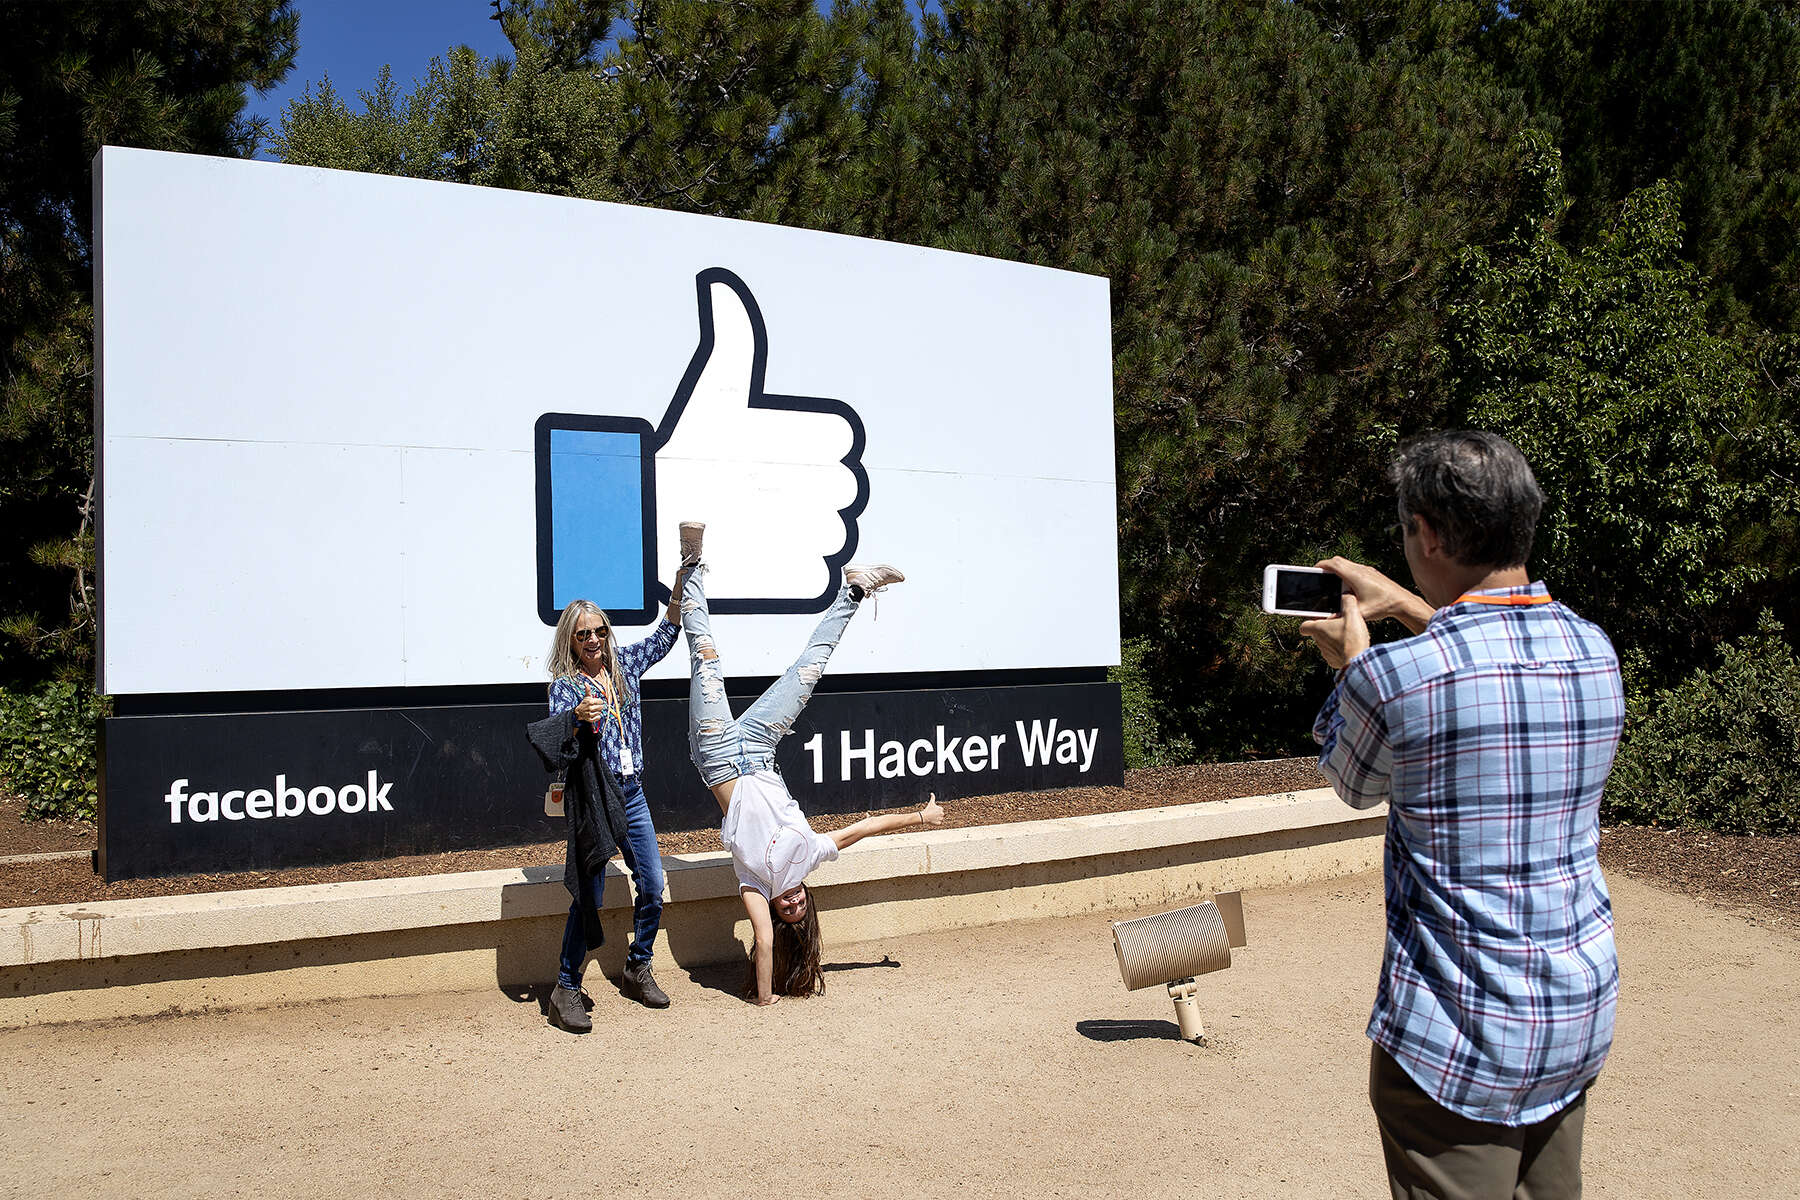 Nicole Voulgaropoulos and her mom, Sheryl Green-Voulgaropoulos, pose in front of Facebook’s thumbs-up sign as Mel Voulgaropoulos, her father, photographs them in Menlo Park, Calif., on August 31, 2018. Nicole was at the time a new Facebook employee and her parents had come for a visit. Access to the company’s campus is restricted and the sign, the area that welcomes visitors without an employee connection, has become a popular place to sightsee and take photos for people who visit Silicon Valley. 